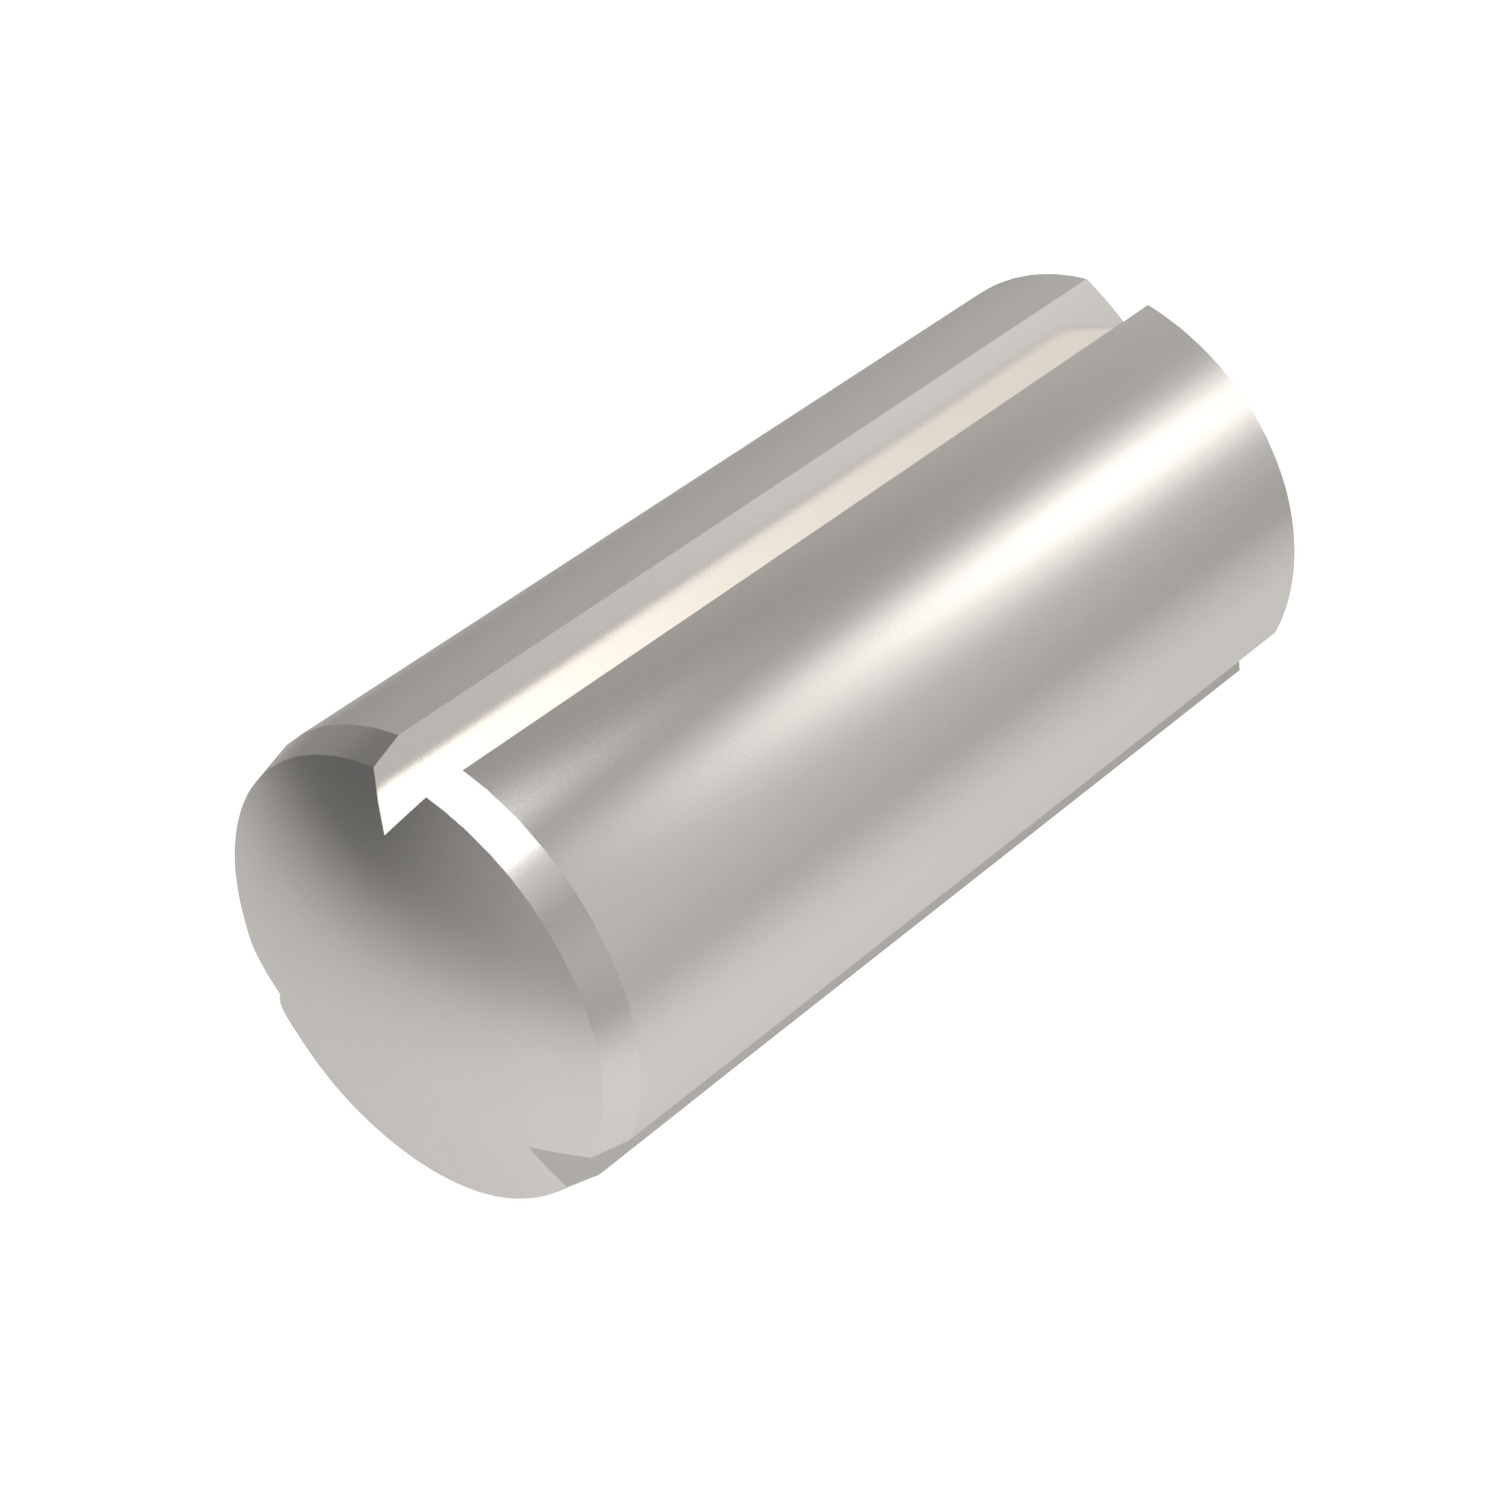 Stainless Grooved Pins Shaft locking pins are generally silver zinc-plated